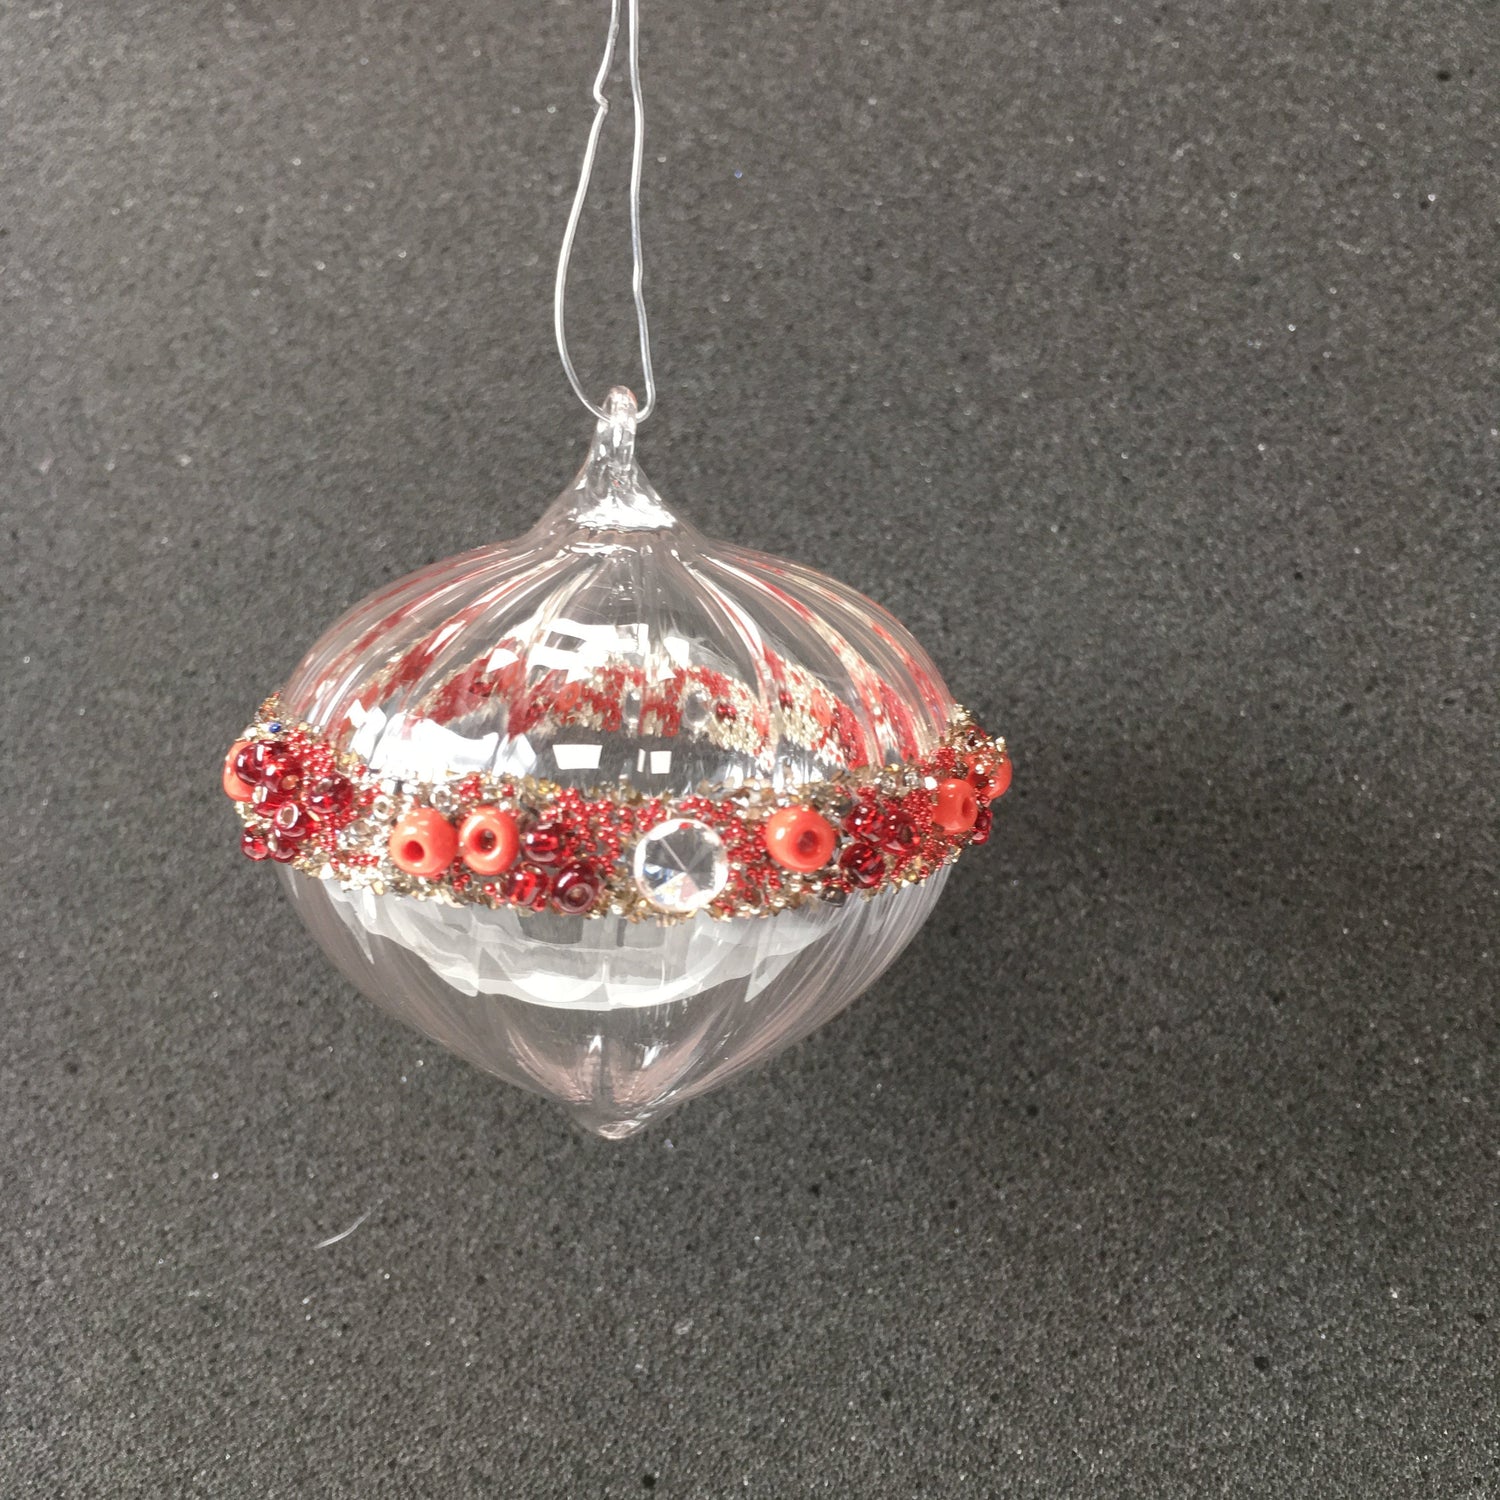 Red Beaded Small Handmade Glass Sultan Hanging Decorations for Christmas Trees, Weddings and Window Decorating.